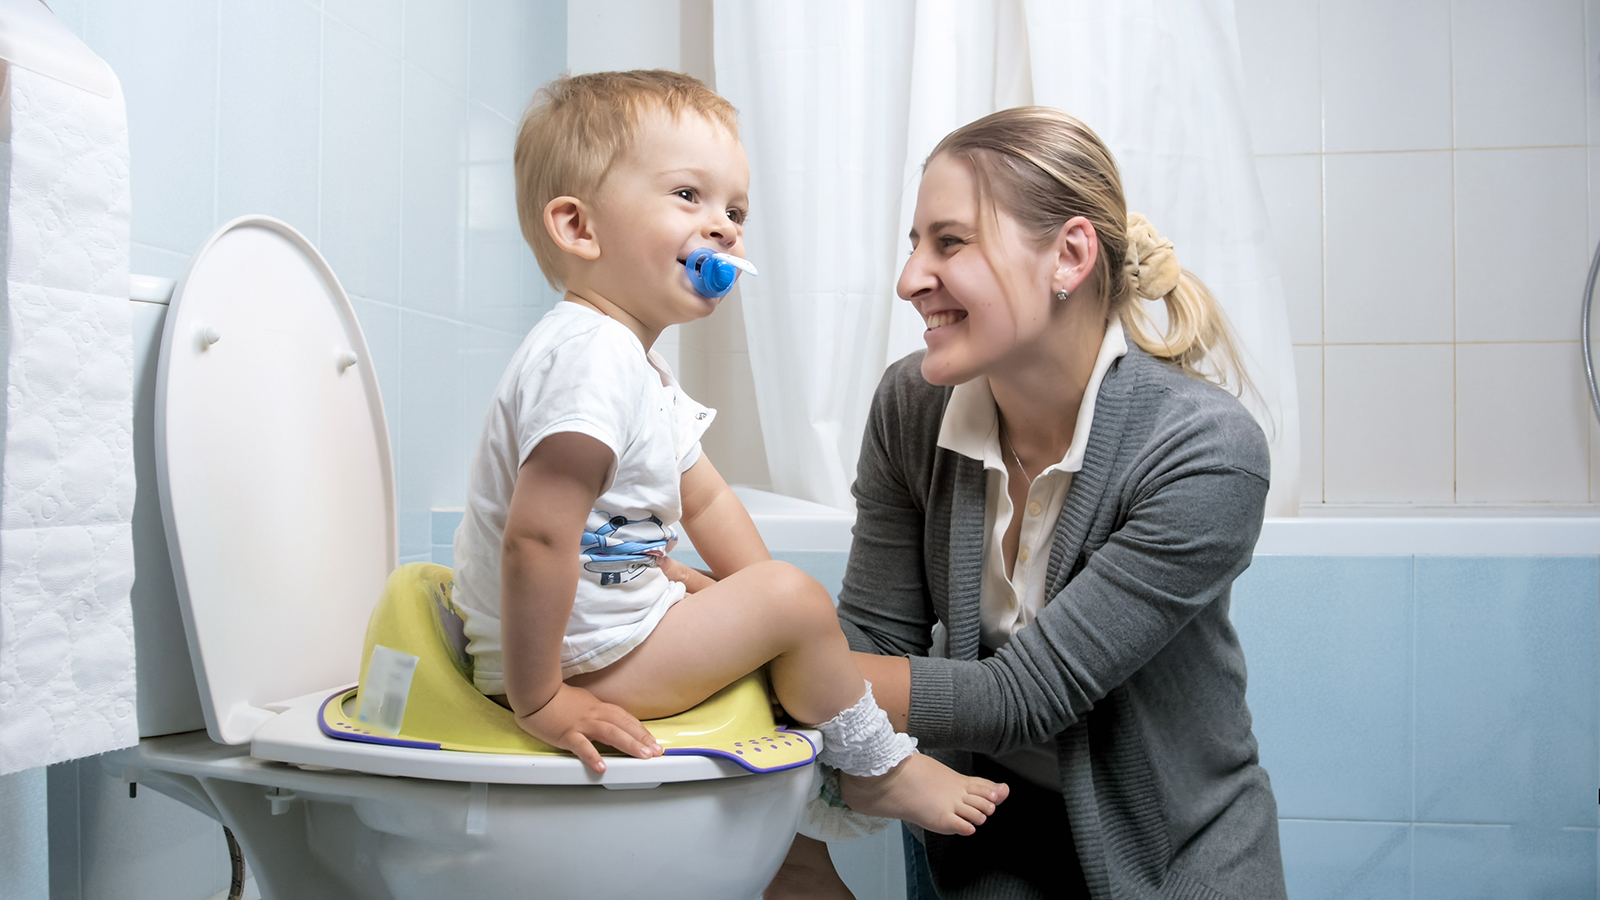 Cute little boy smiling to mother while sitting on toilet seat